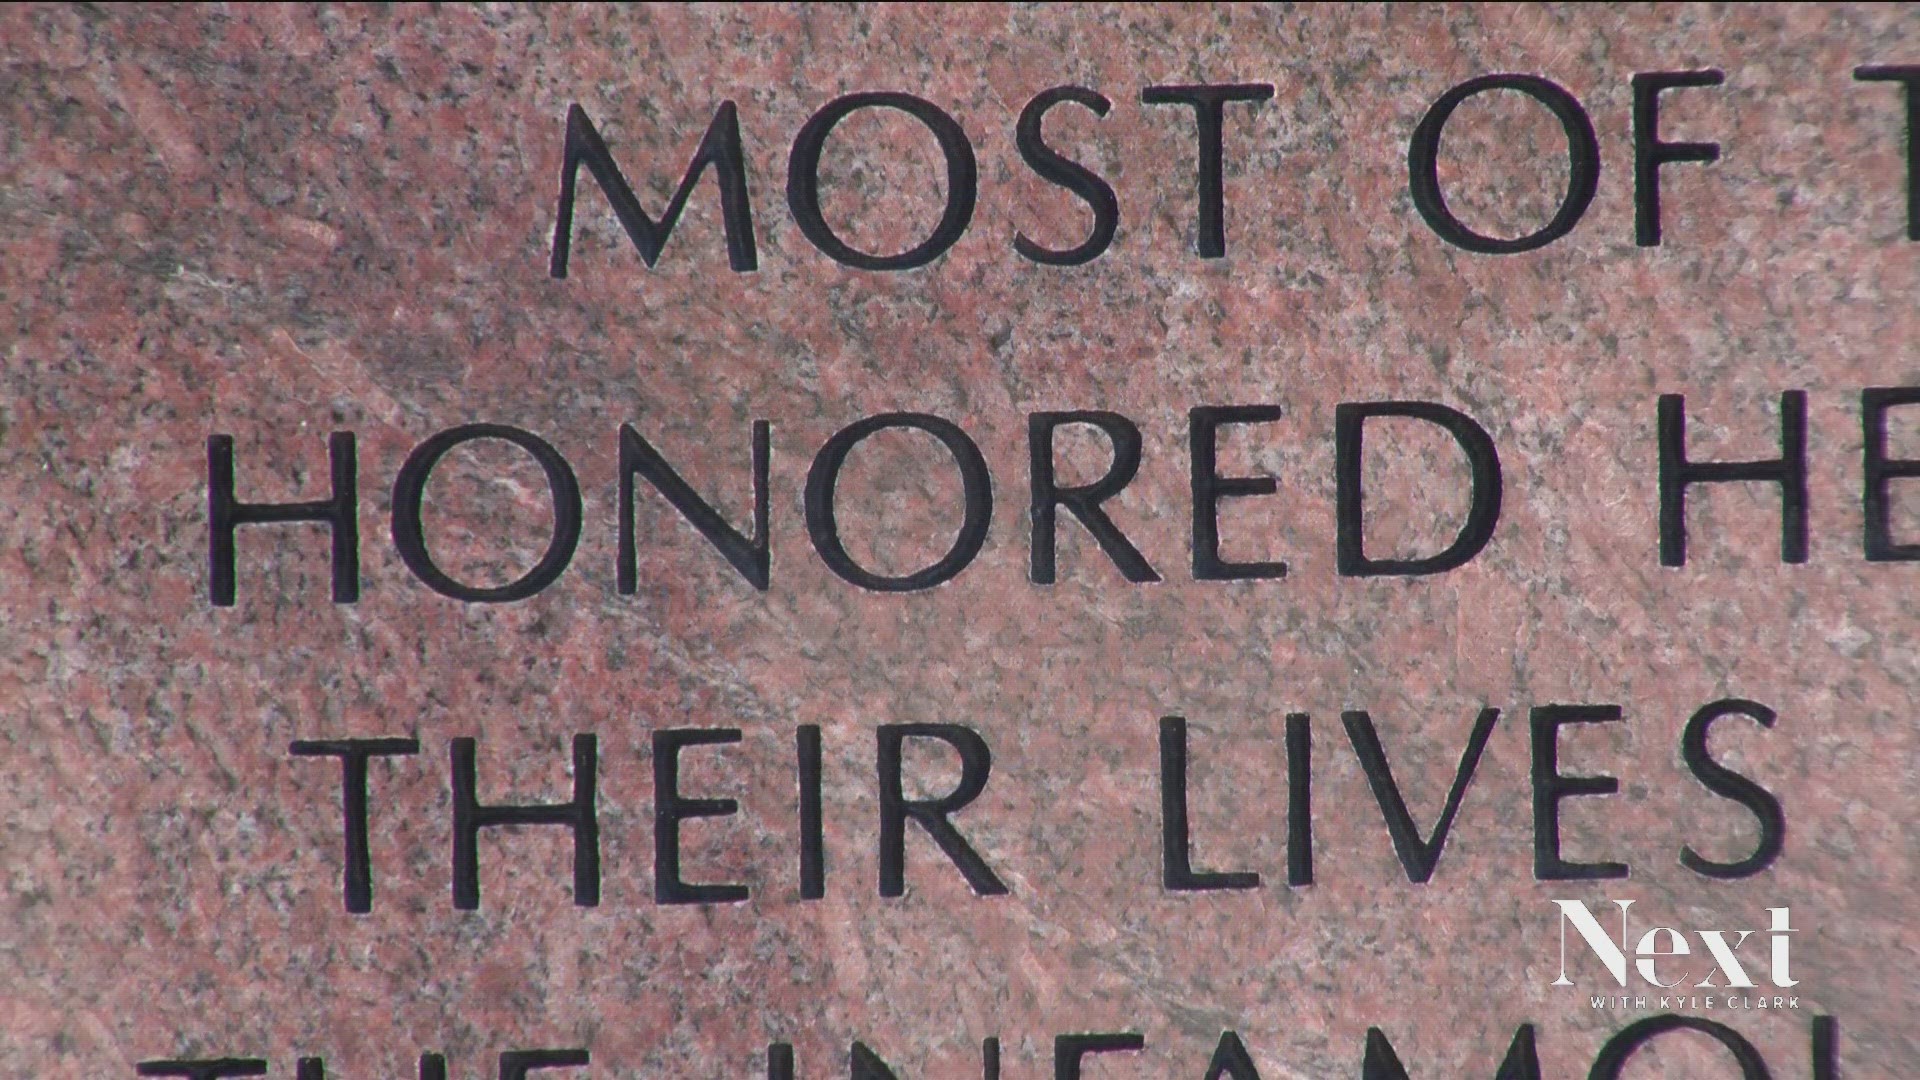 For 10 years, the Colorado Freedom Memorial in Aurora has honored 6,200 Coloradans killed or missing in action - why holding space for those we've lost can do good.